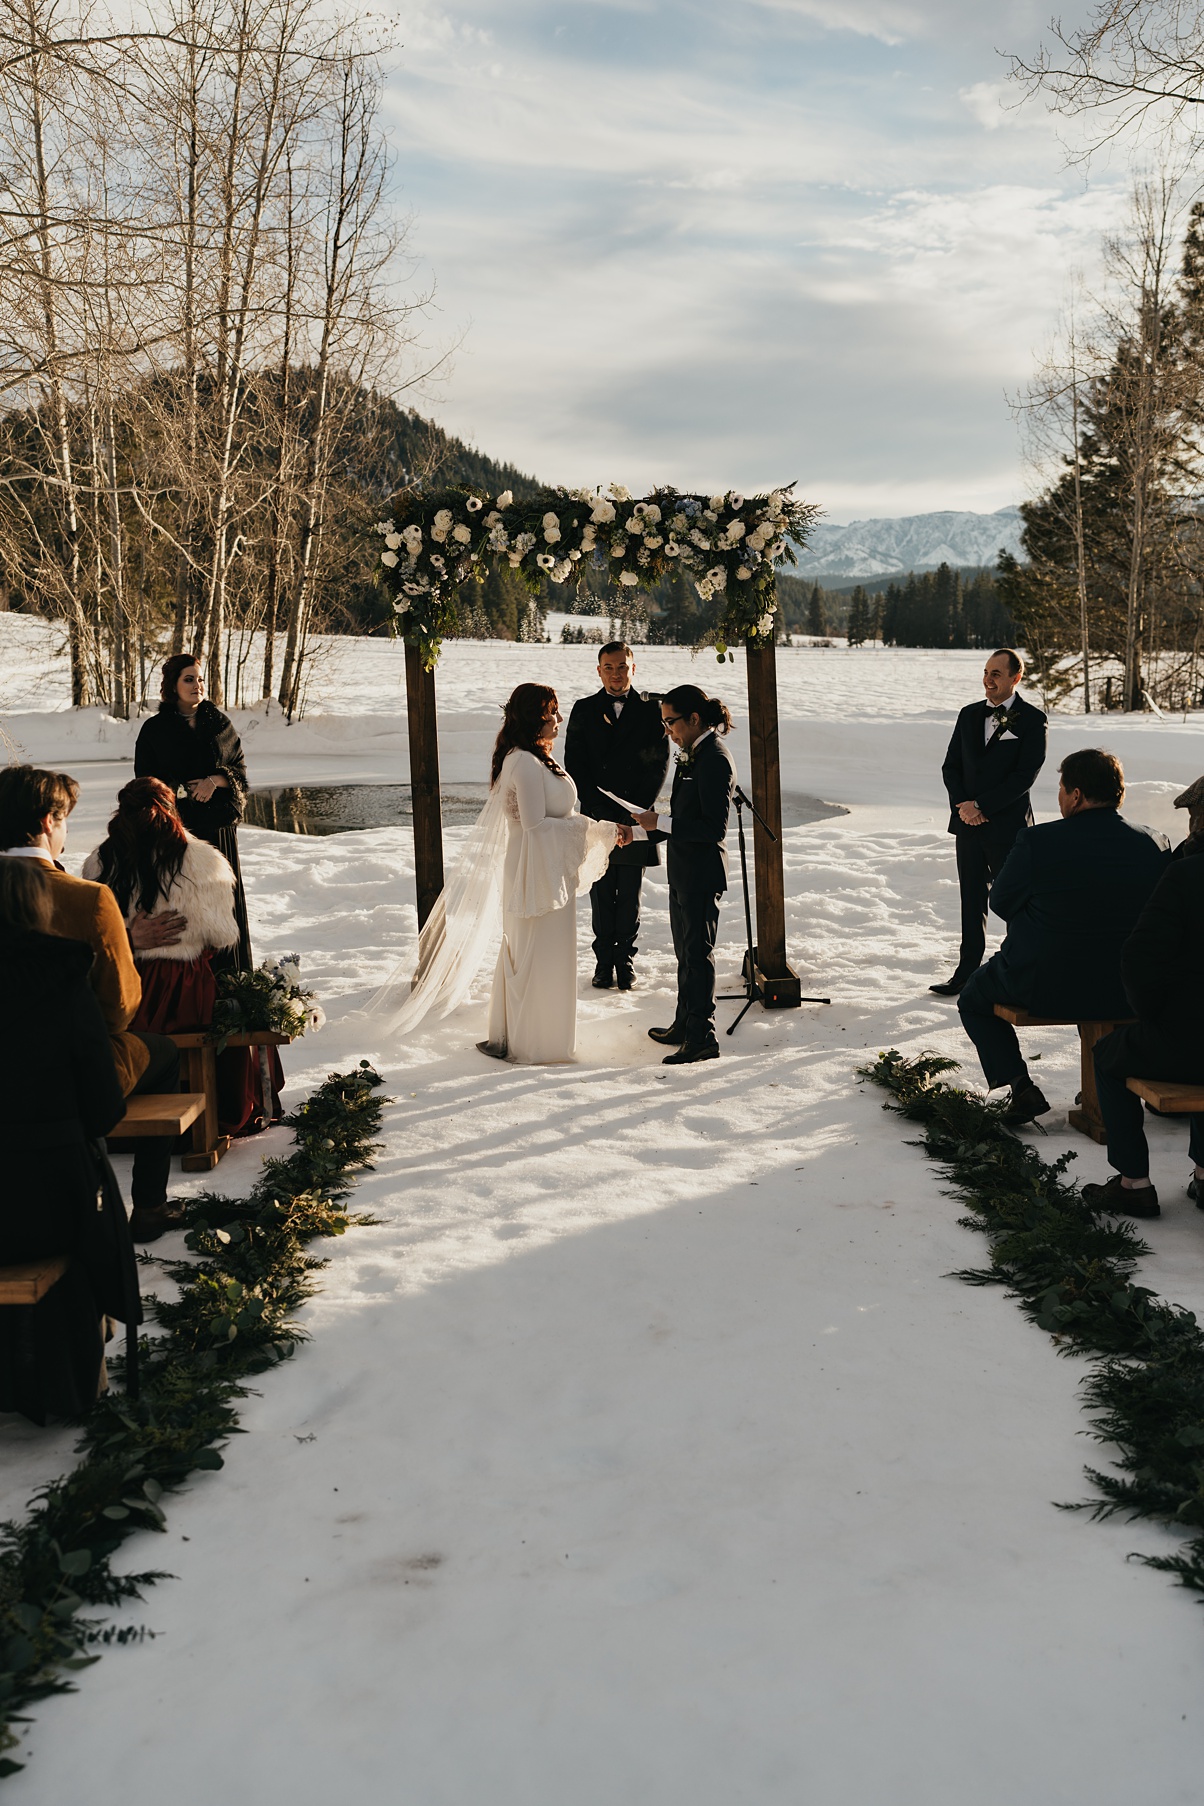 The couple standing at their wedding ceremony with mountains in the background